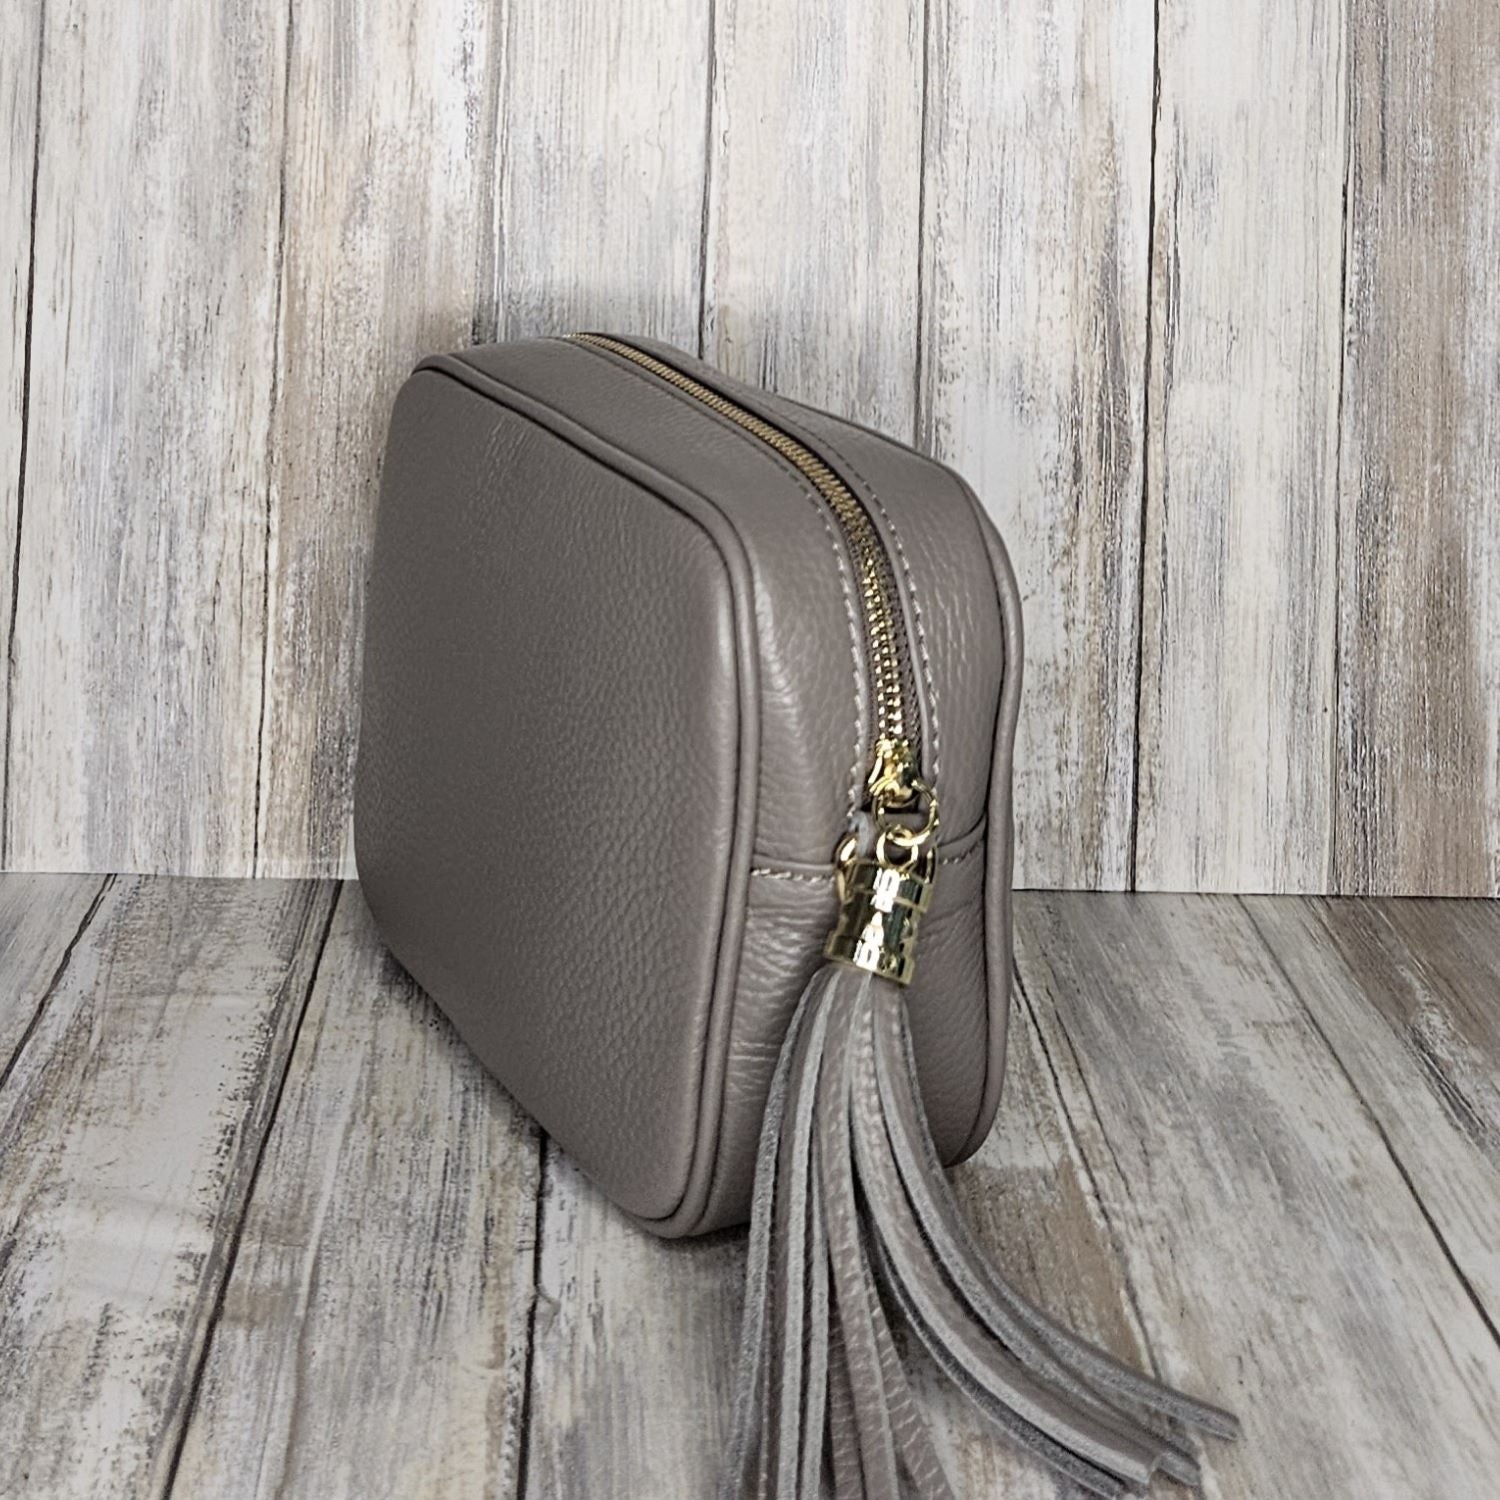 This classic Italian Leather Camera Bag is the ideal everyday accessory, featuring a sophisticated leather strap, or spice up your style with one of our canvas bag straps.   Fully lined   Internal Card Pocket   Gold Hardware  Detachable Long Strap   Tassel Key Ring   L21CM H14.50CM H7CM